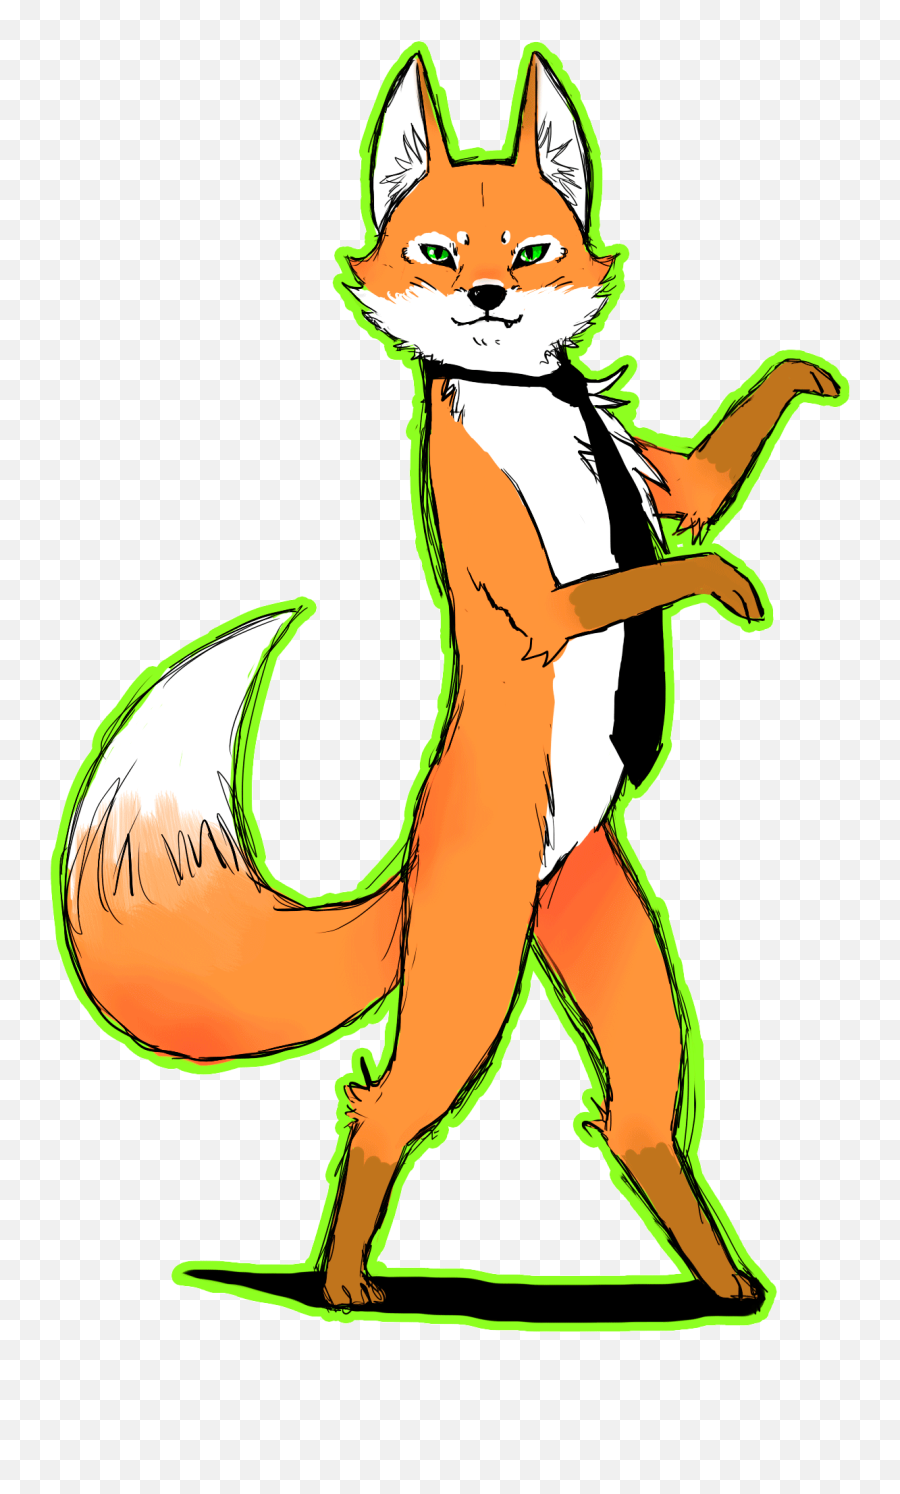 Png Gif Dancing Fox Images Download Banner Black And - Gif Gif Animation Dance Fox,Dancing Gif Png